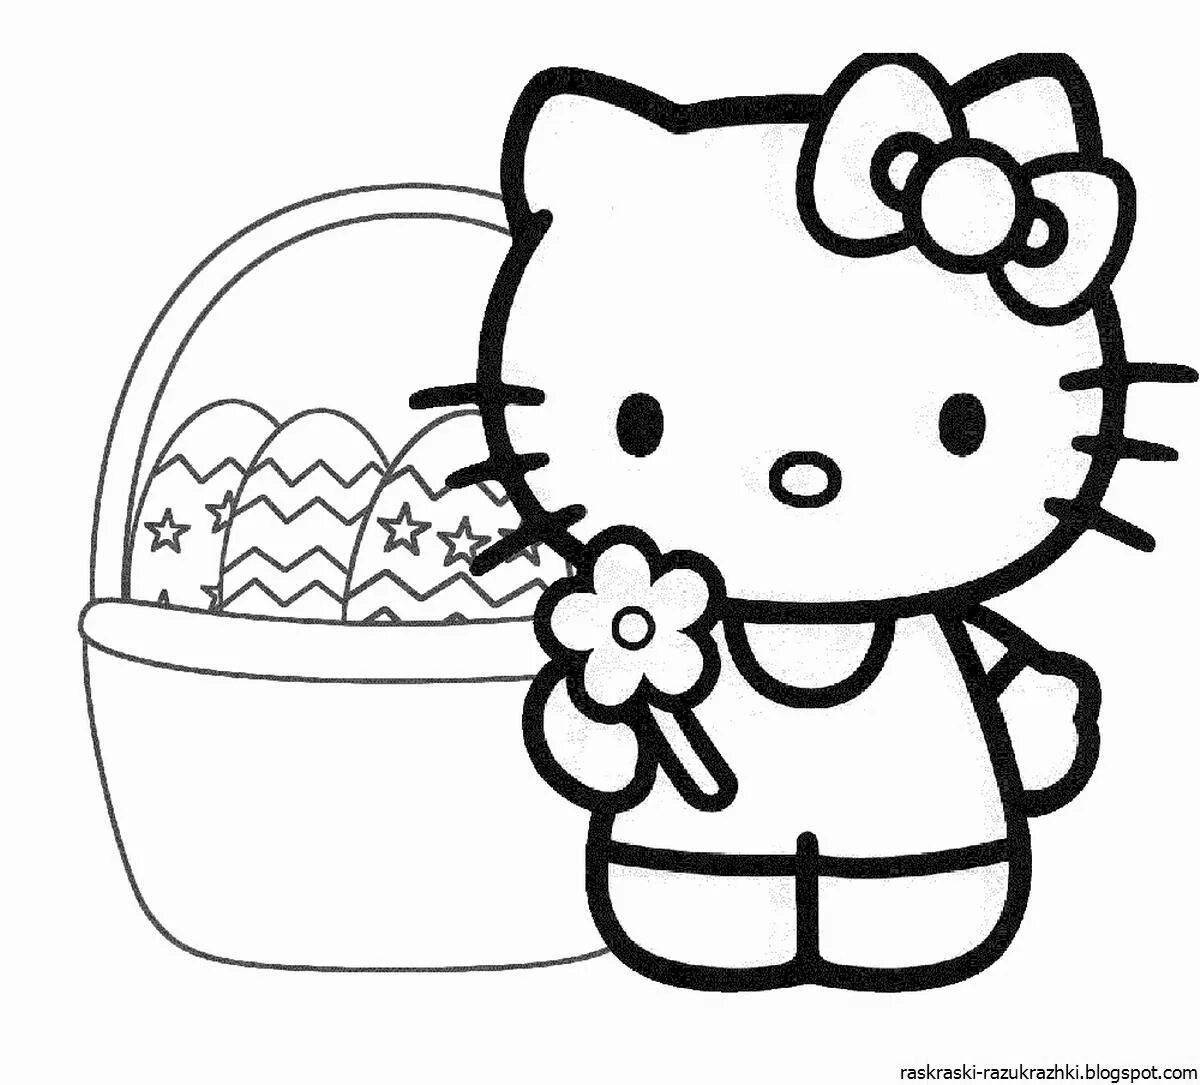 Kitty bubble coloring for kids